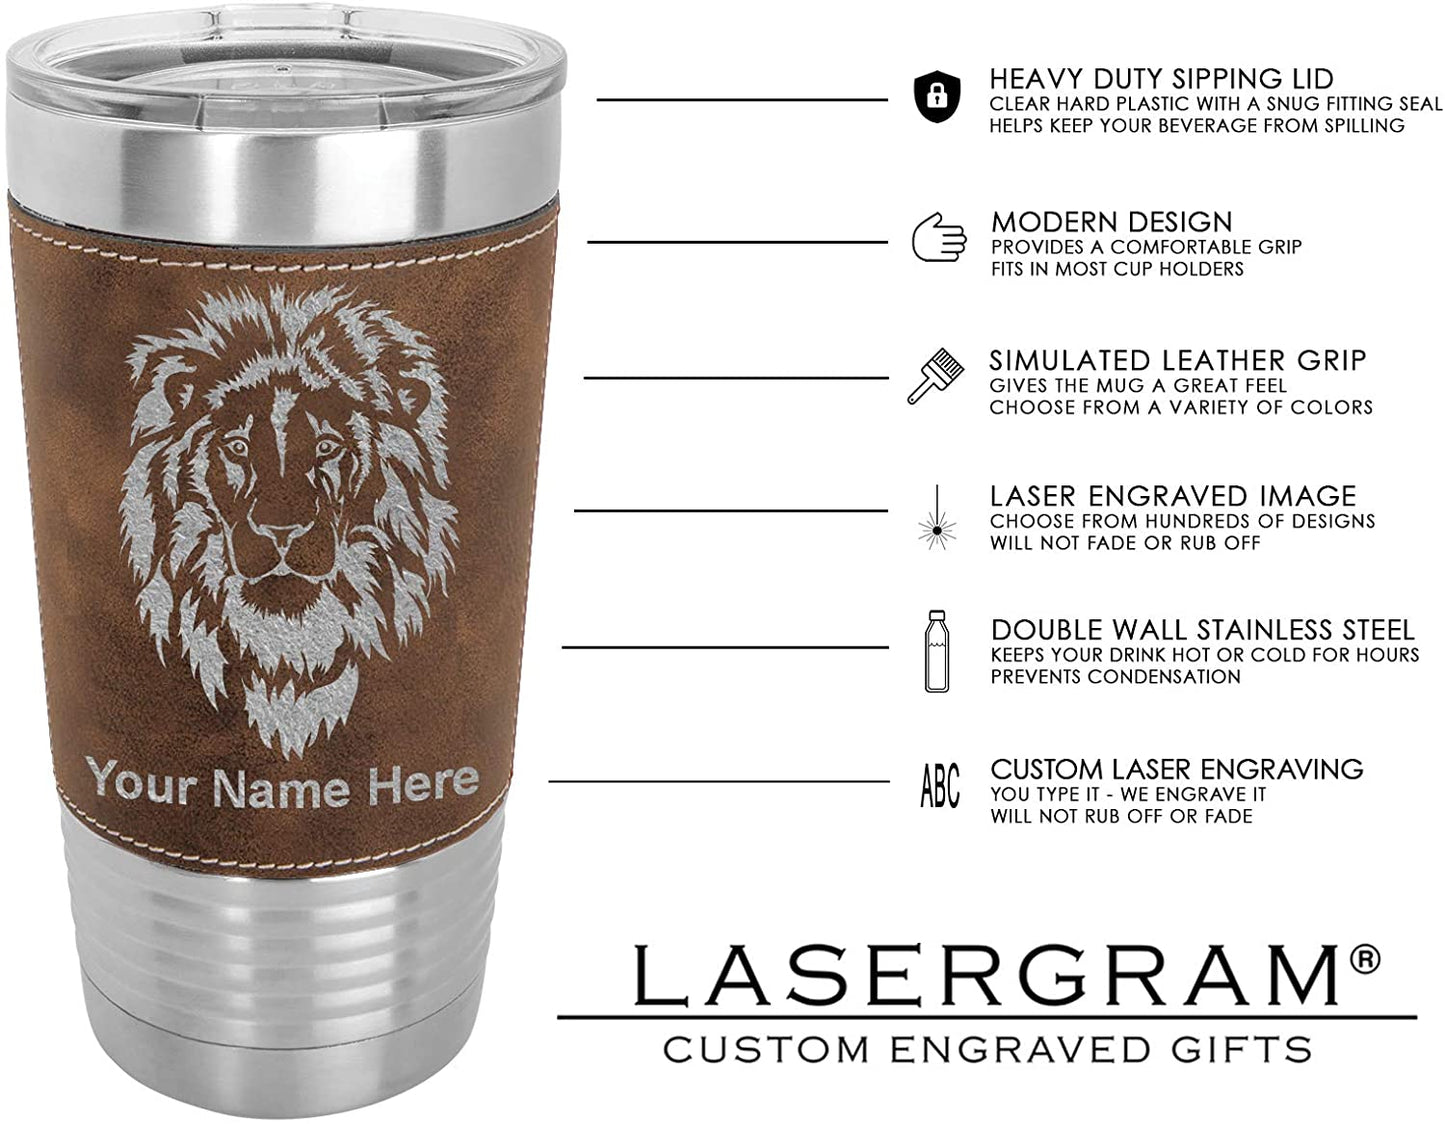 20oz Faux Leather Tumbler Mug, STN Student Nurse, Personalized Engraving Included